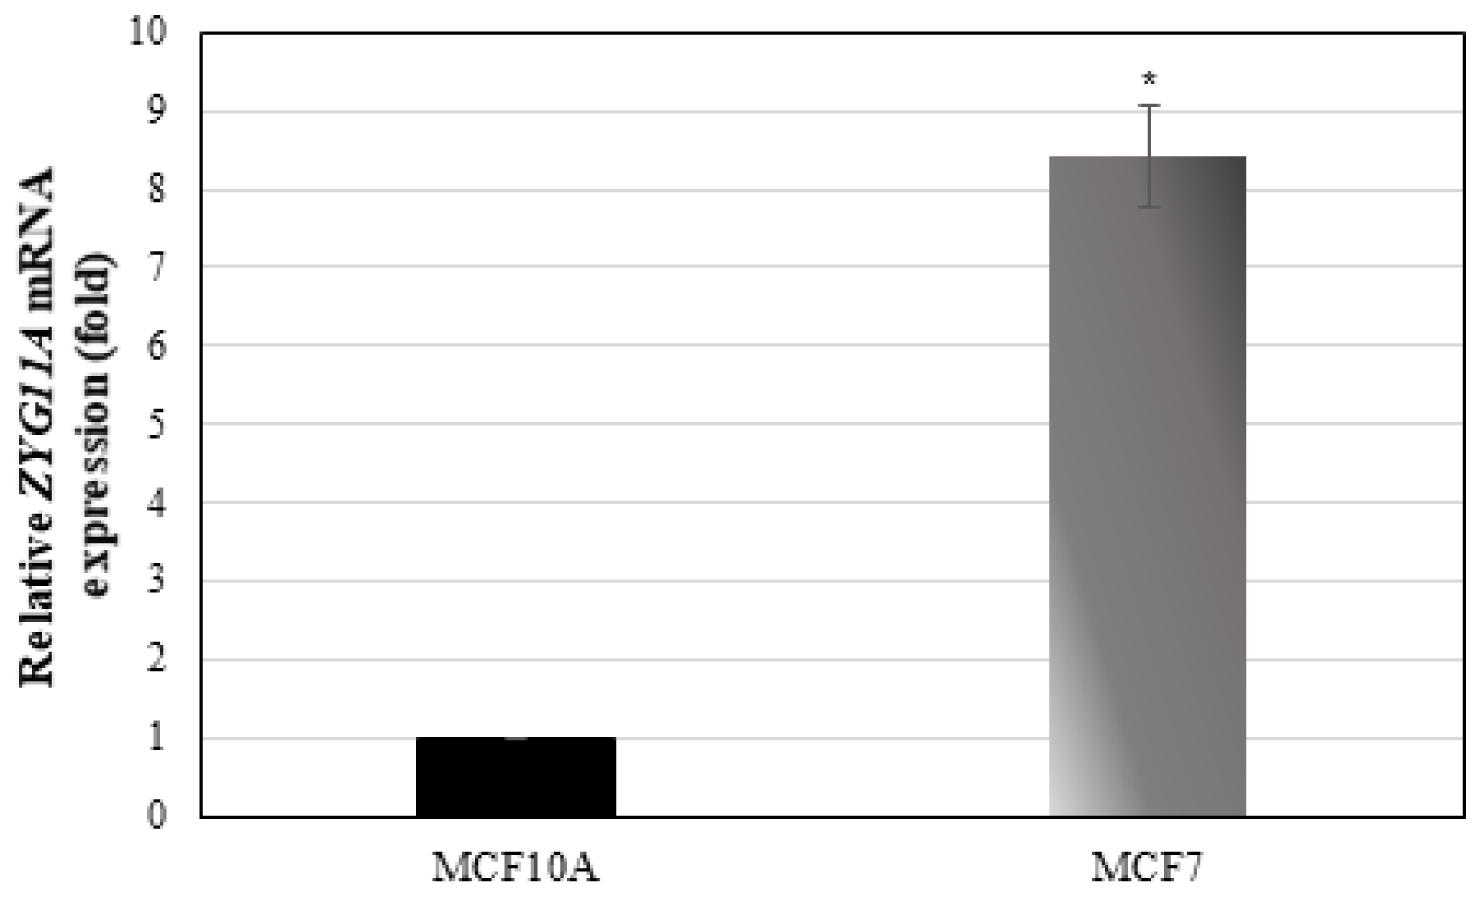 ZYG11A mRNA expression in breast cancer cell lines.